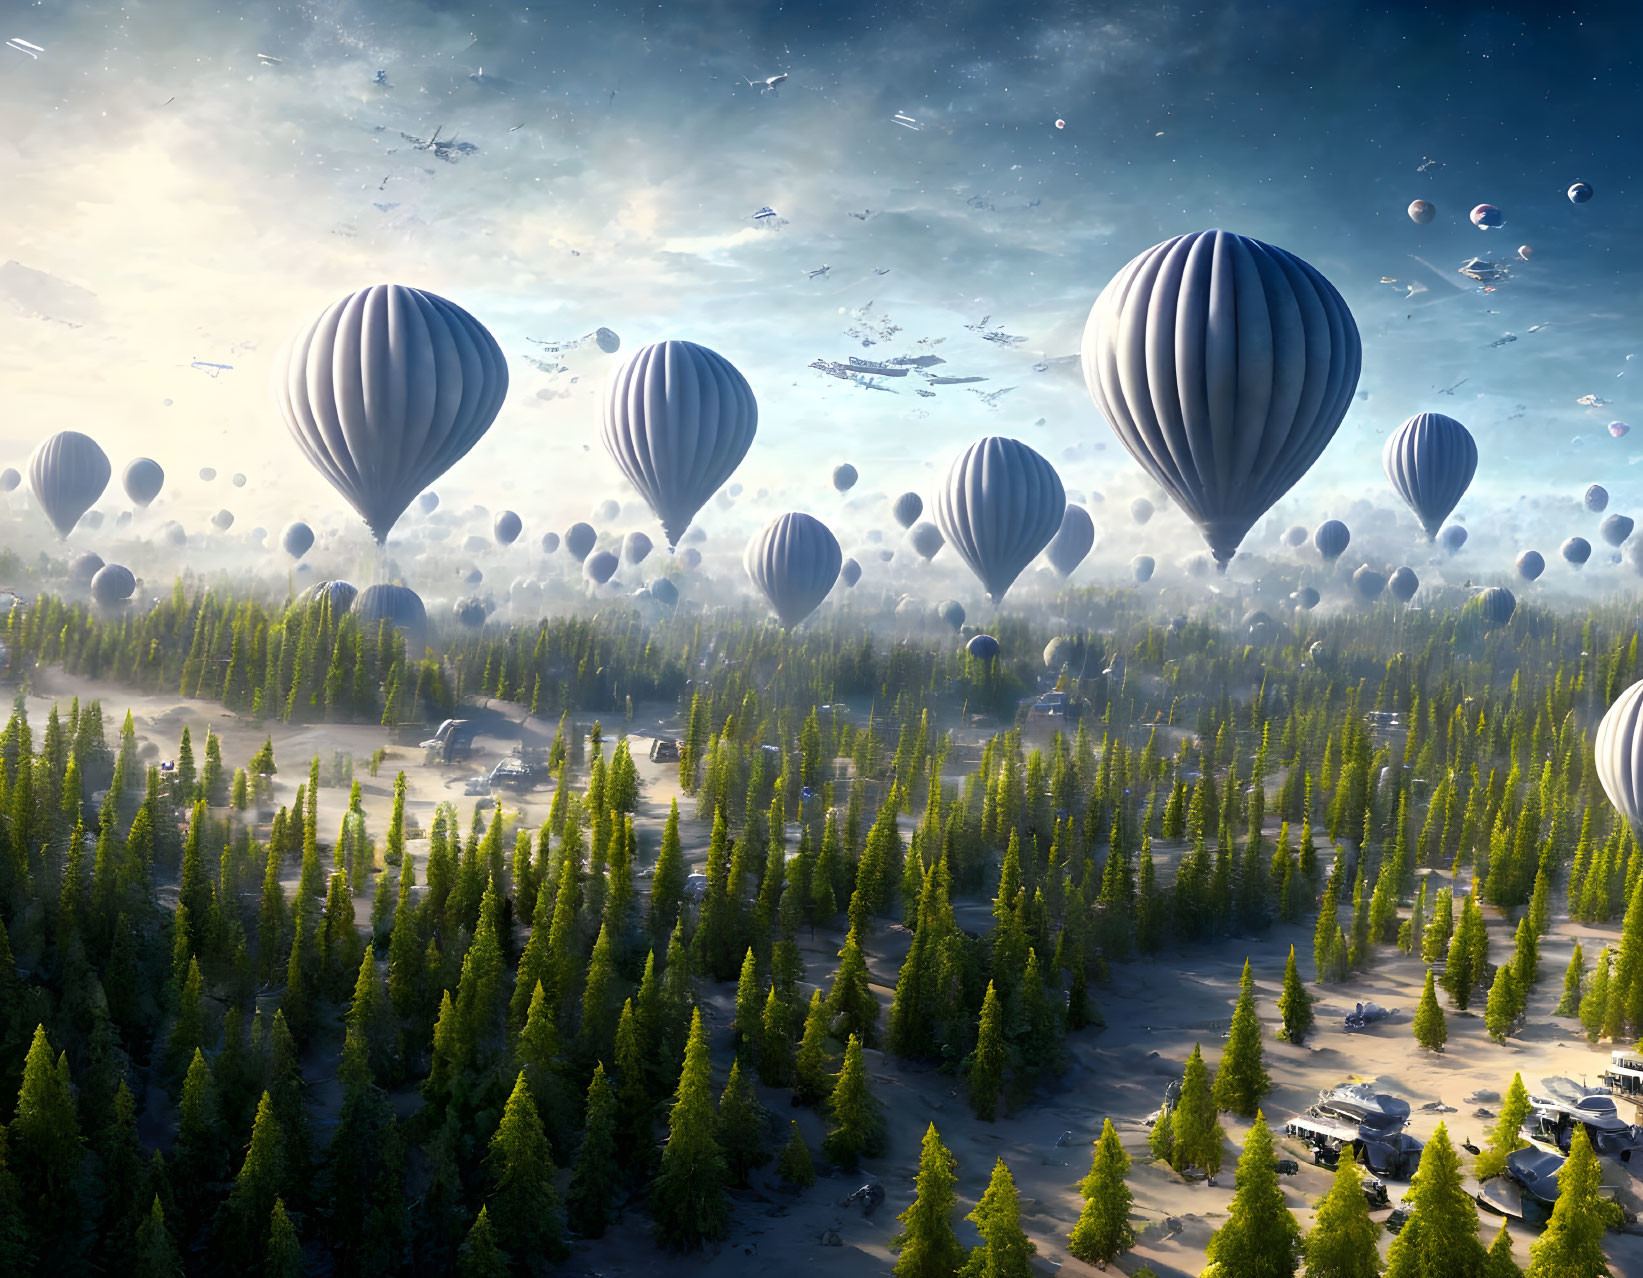 Fantastical landscape with hot air balloons, pine forest, floating rock islands, and spaceships.